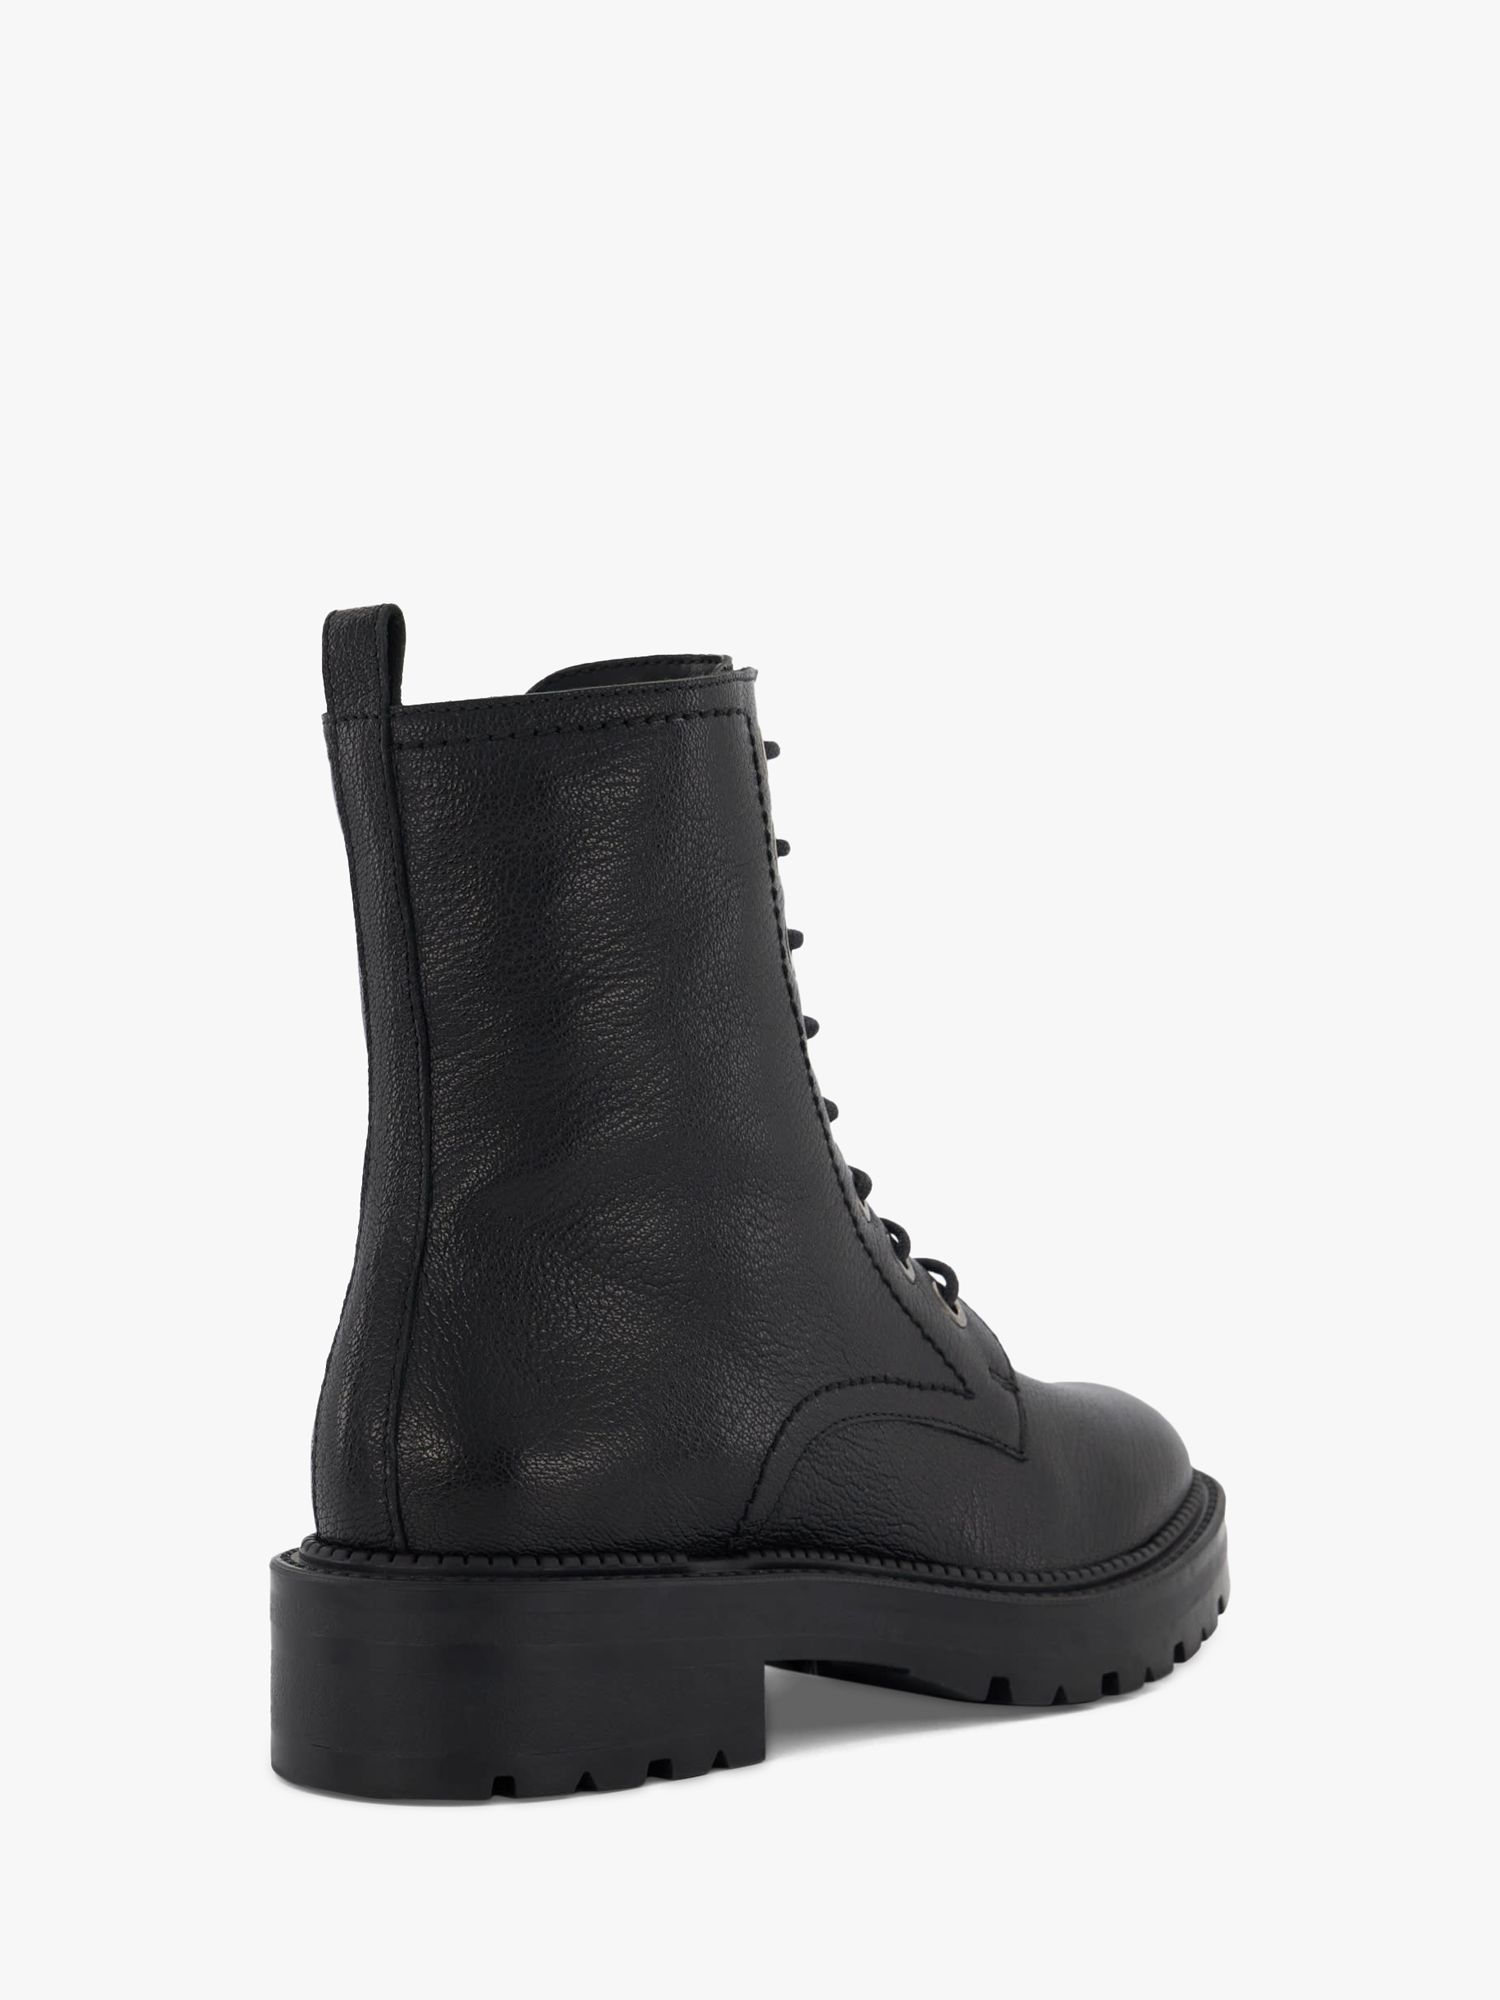 Dune Press Embossed Leather Ankle Boots, Black at John Lewis & Partners